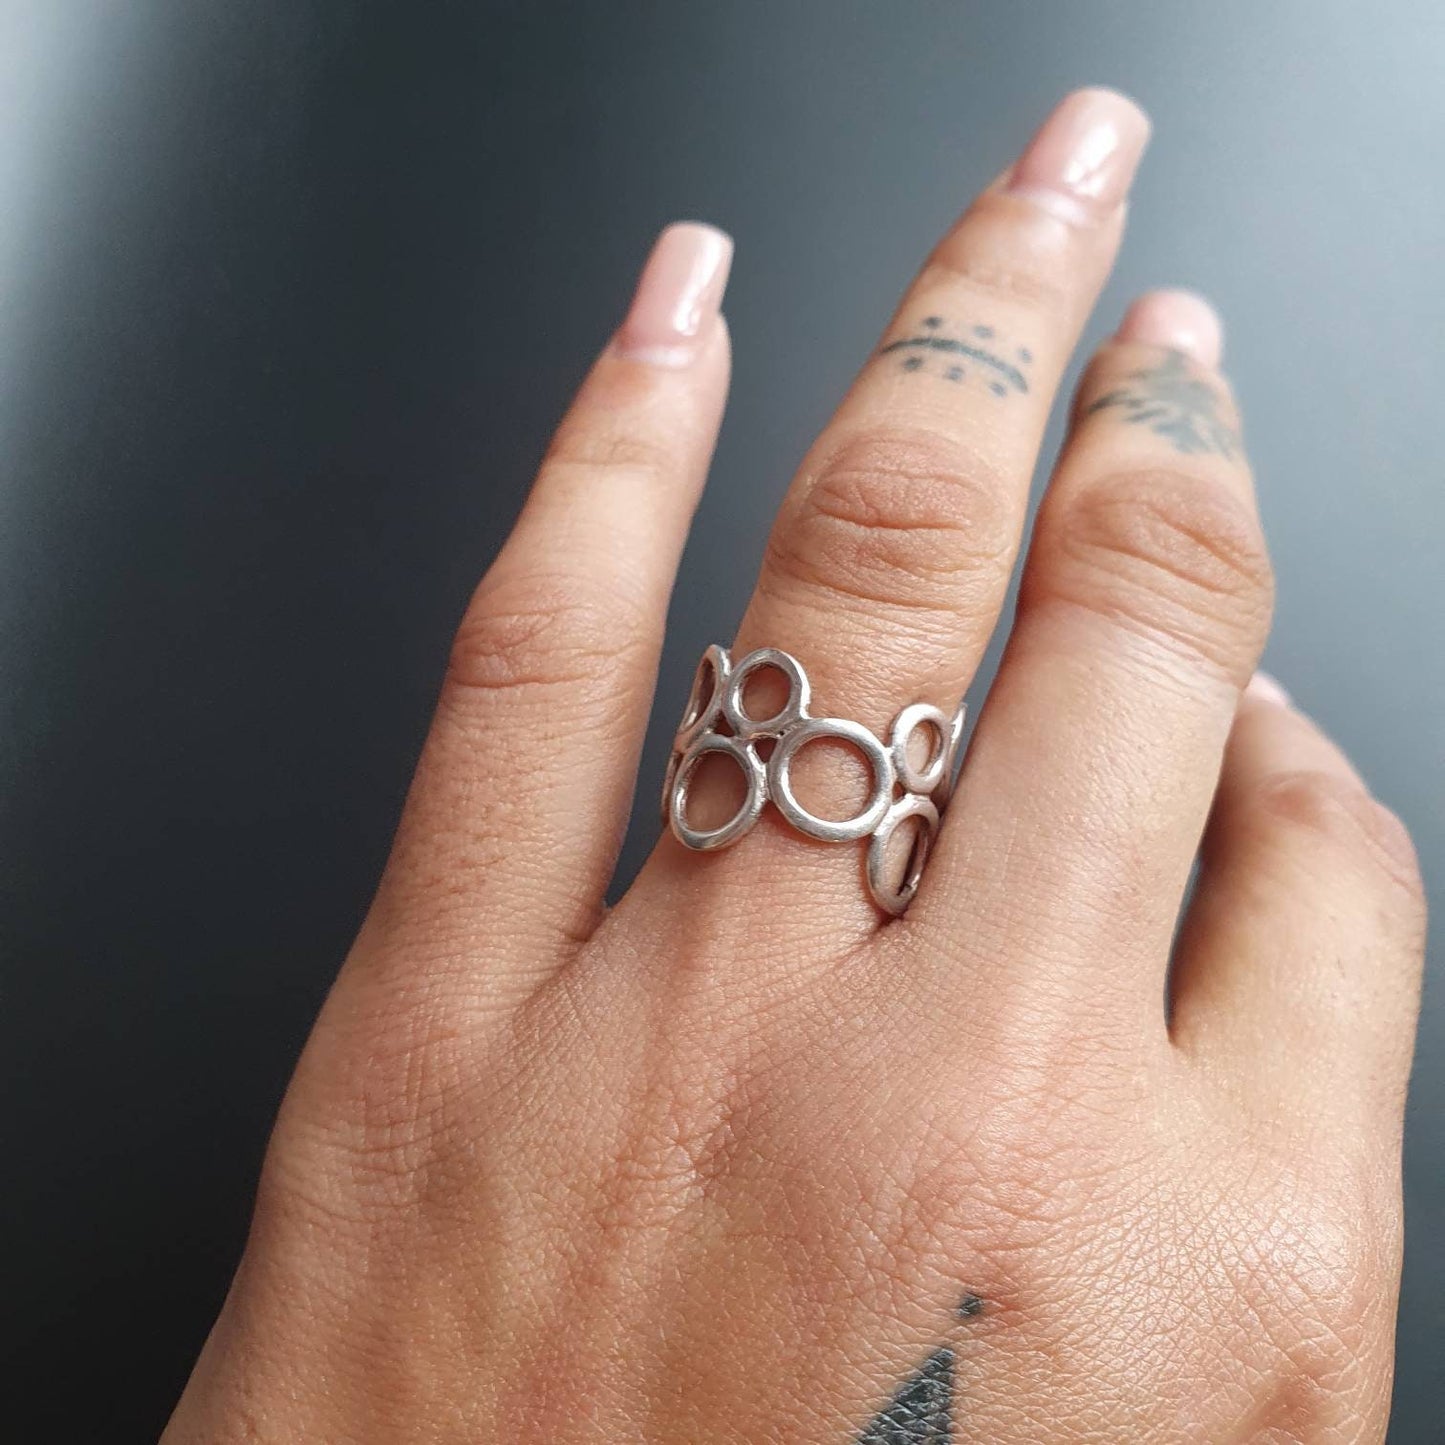 Sterling silver ring, statement ring, unusual gifts, circular design, handmade vintage ring, artistic style,band ring, unisex, gender fluid